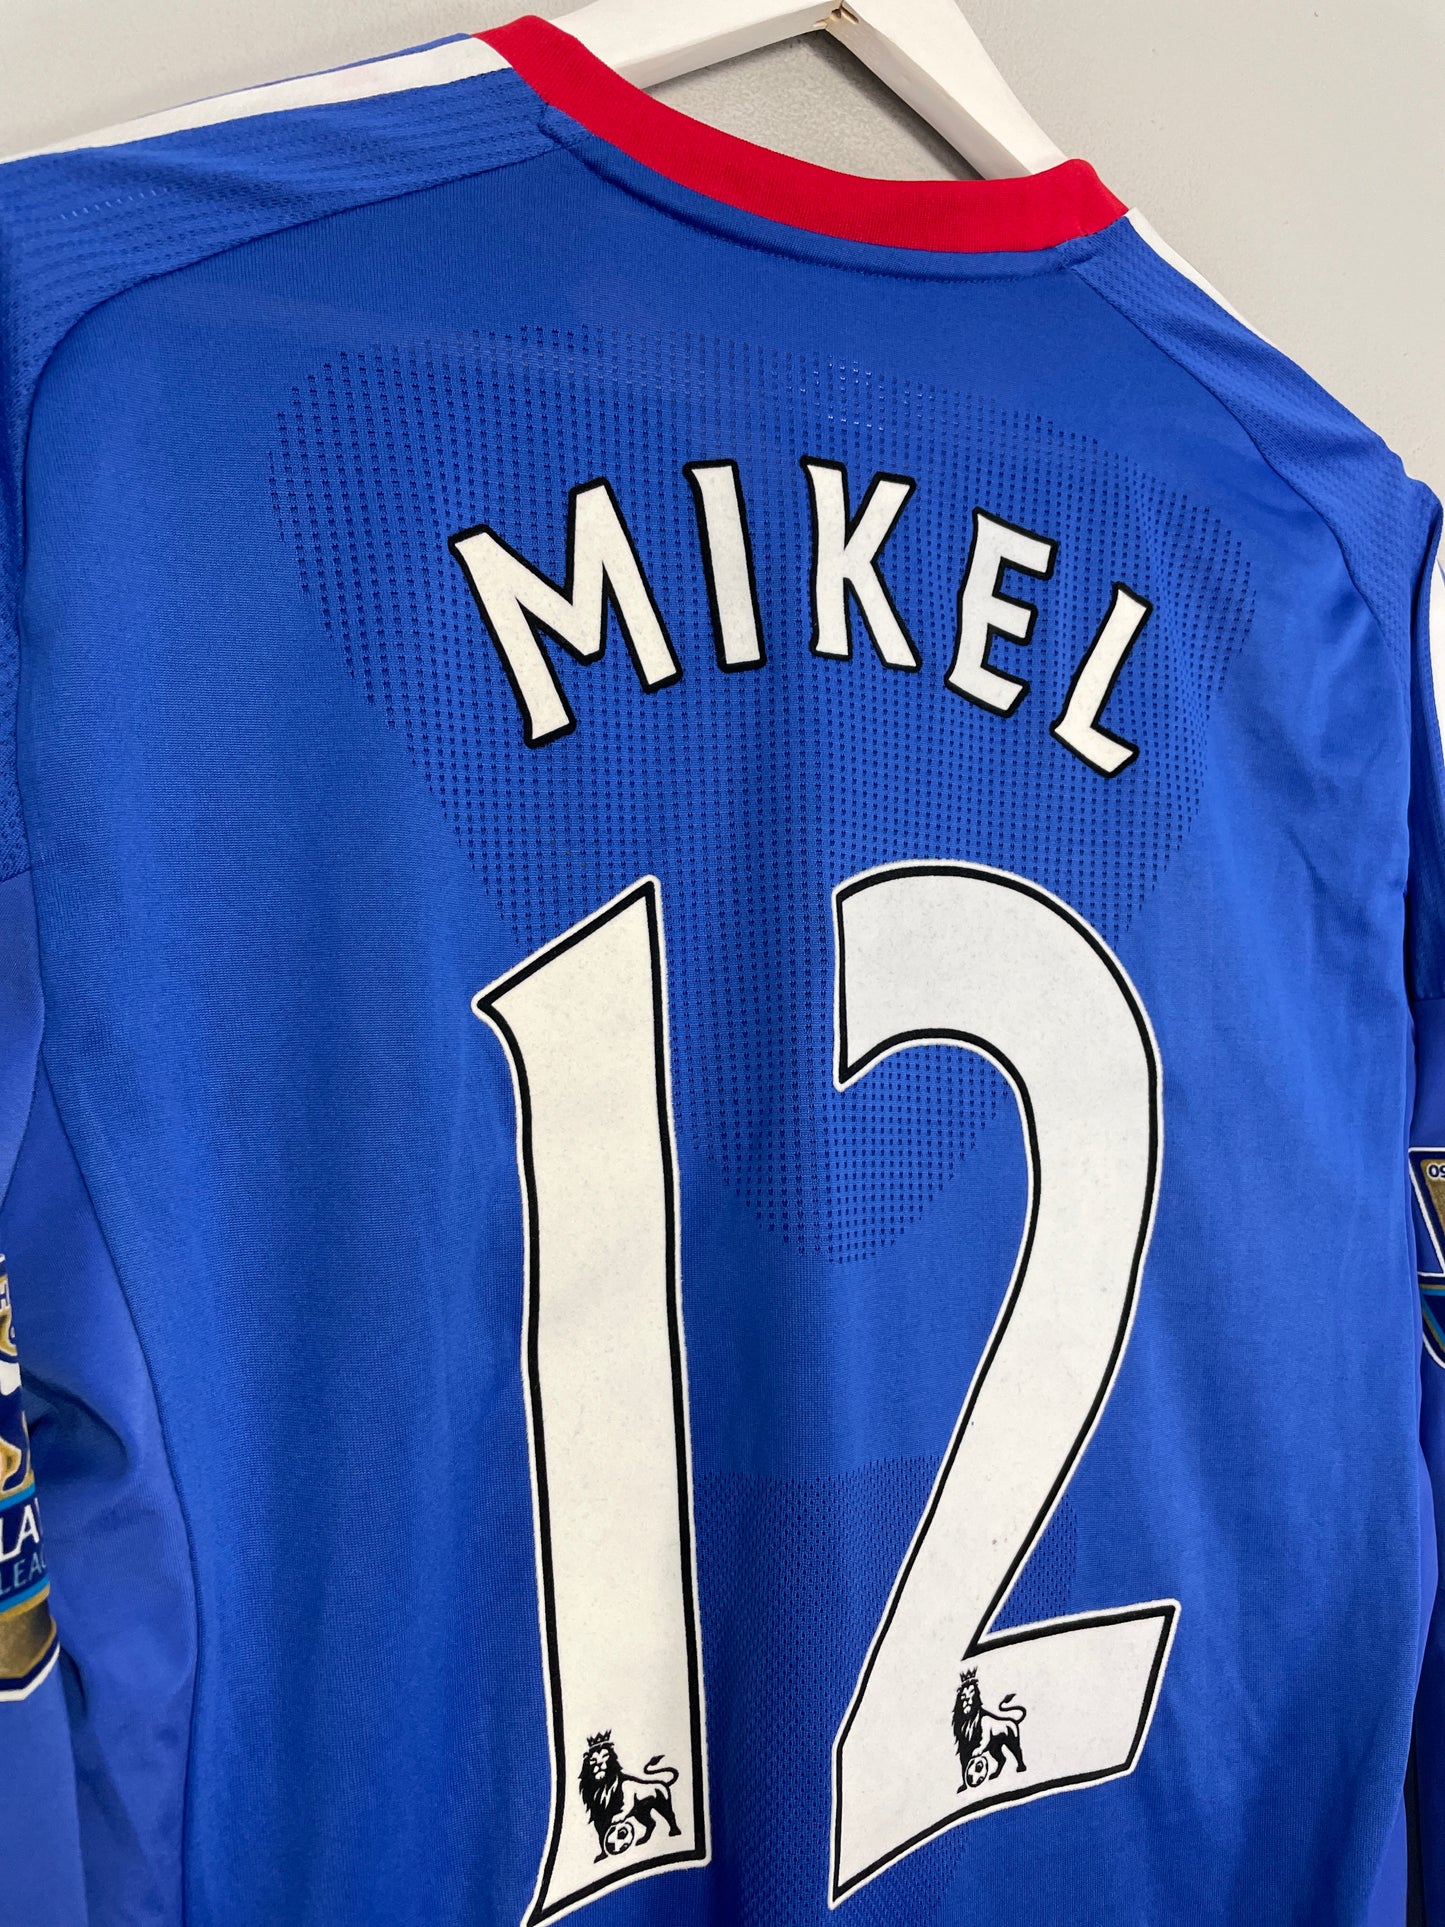 2010/11 CHELSEA MIKEL #17 *MATCH ISSUE* L/S HOME SHIRT (XL) ADIDAS